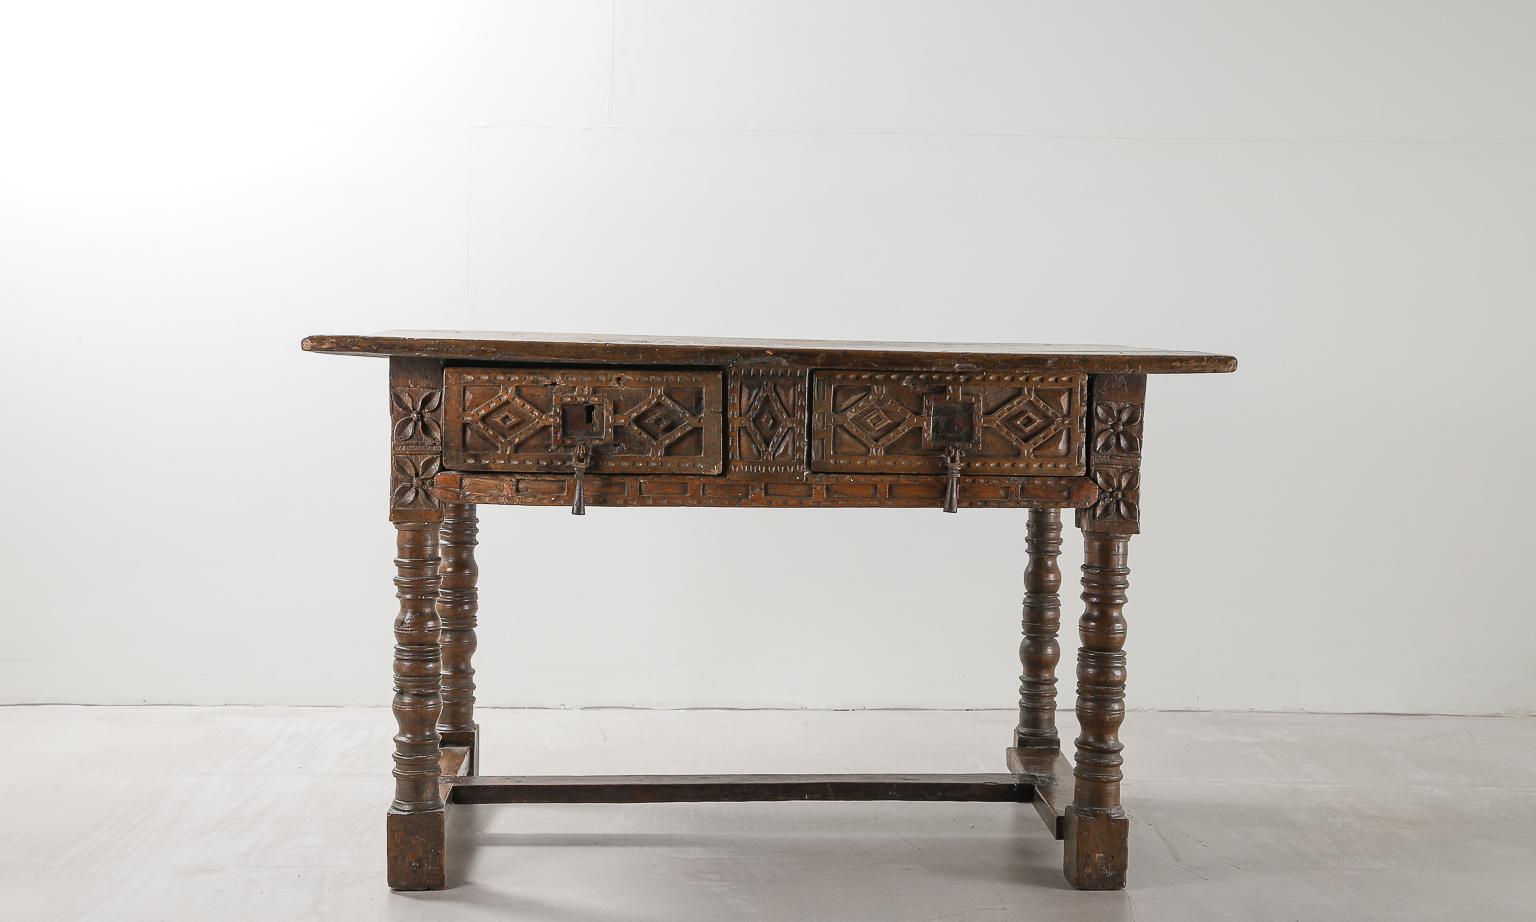 An ornately carved desk originating from Spain in the late 17th century. 

Heavy turned legs joined by stretchers, supporting a two drawer frieze with geometric and floral carved details to both the front and back of the piece. 

Two sturdy and